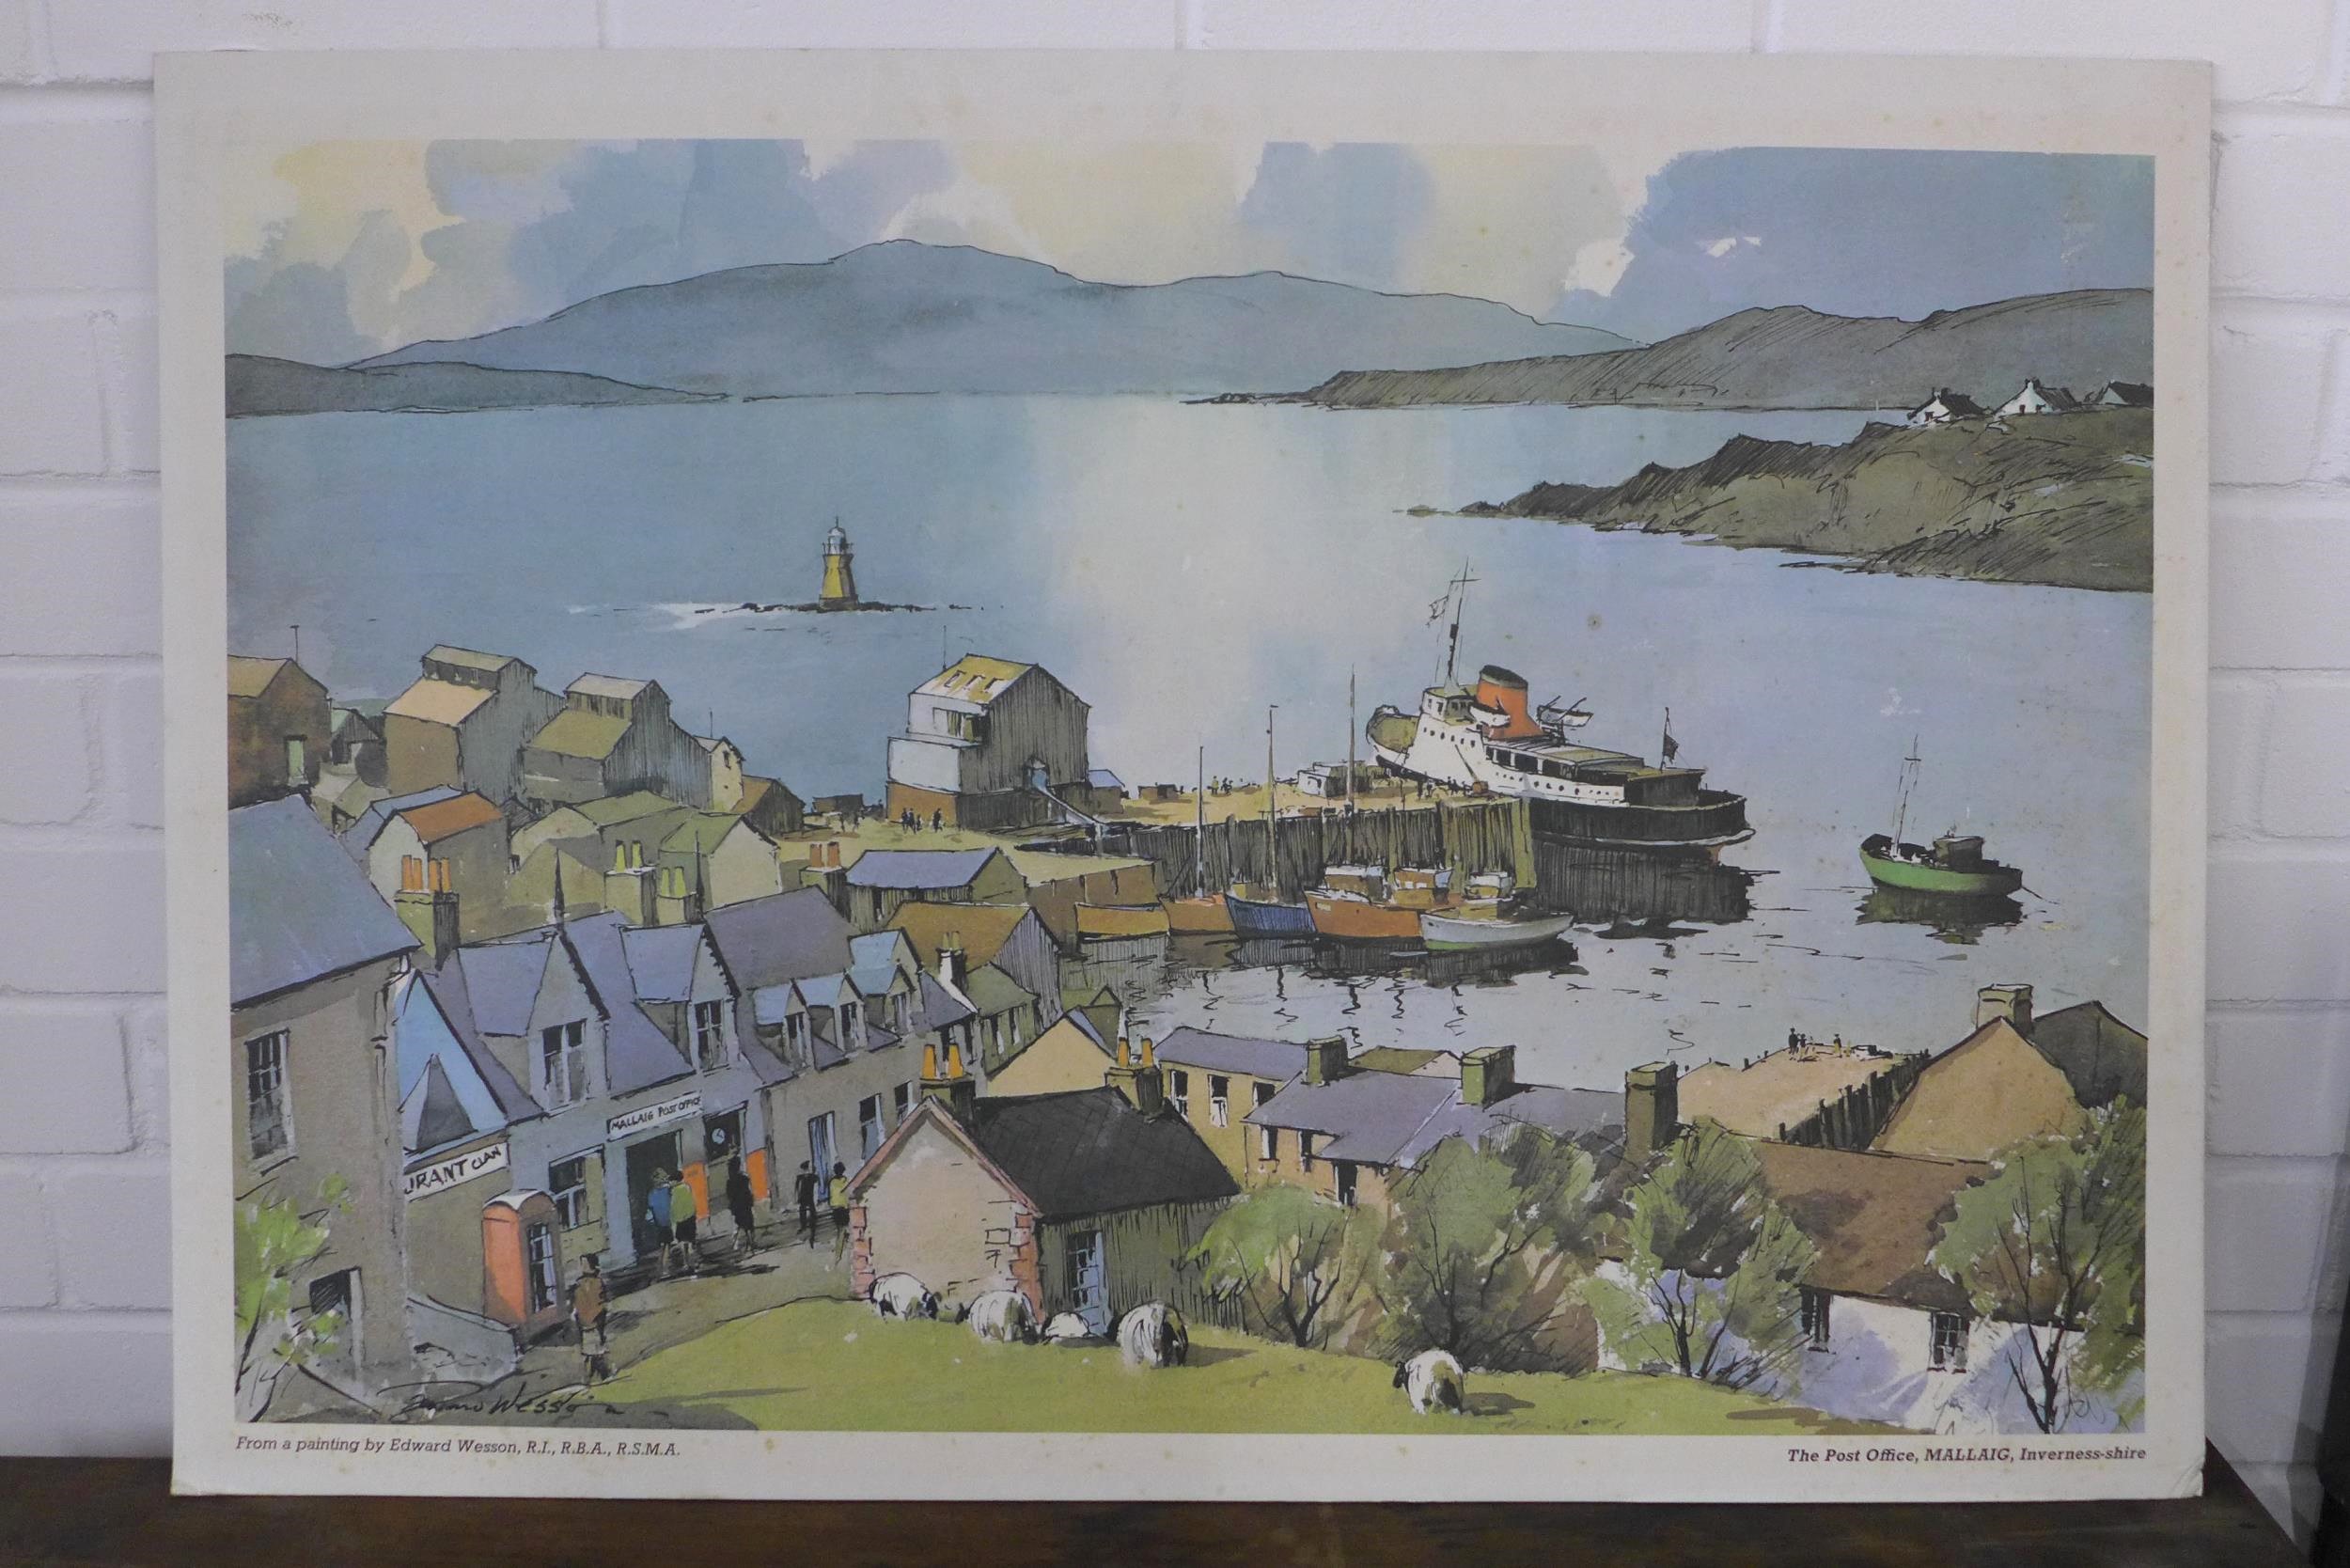 EDWARD WESSON, R.I, R.B.A, R.S.M.A, large card poster of The Post Office, Mallaig, 80 X 58cm overall - Image 2 of 2